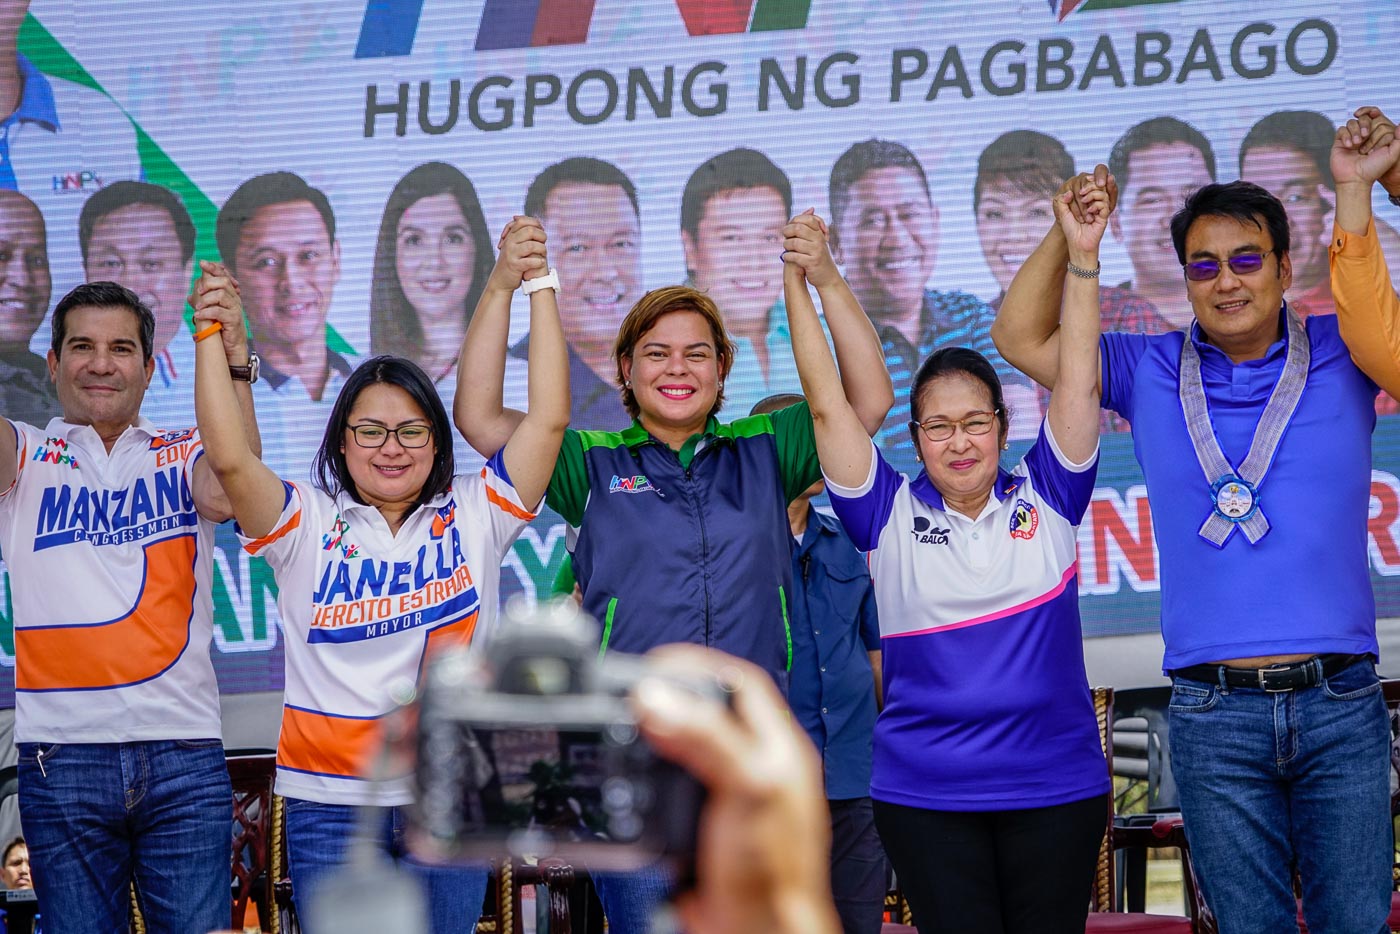 DUTERTE AND EJERCITO-ESTRADA CLAN. Sara Duterte supports the San Juan mayoral bid of Janella Ejercito (on Sara's right) on February 27, 2019. Photo by Maria Tan/Rappler 